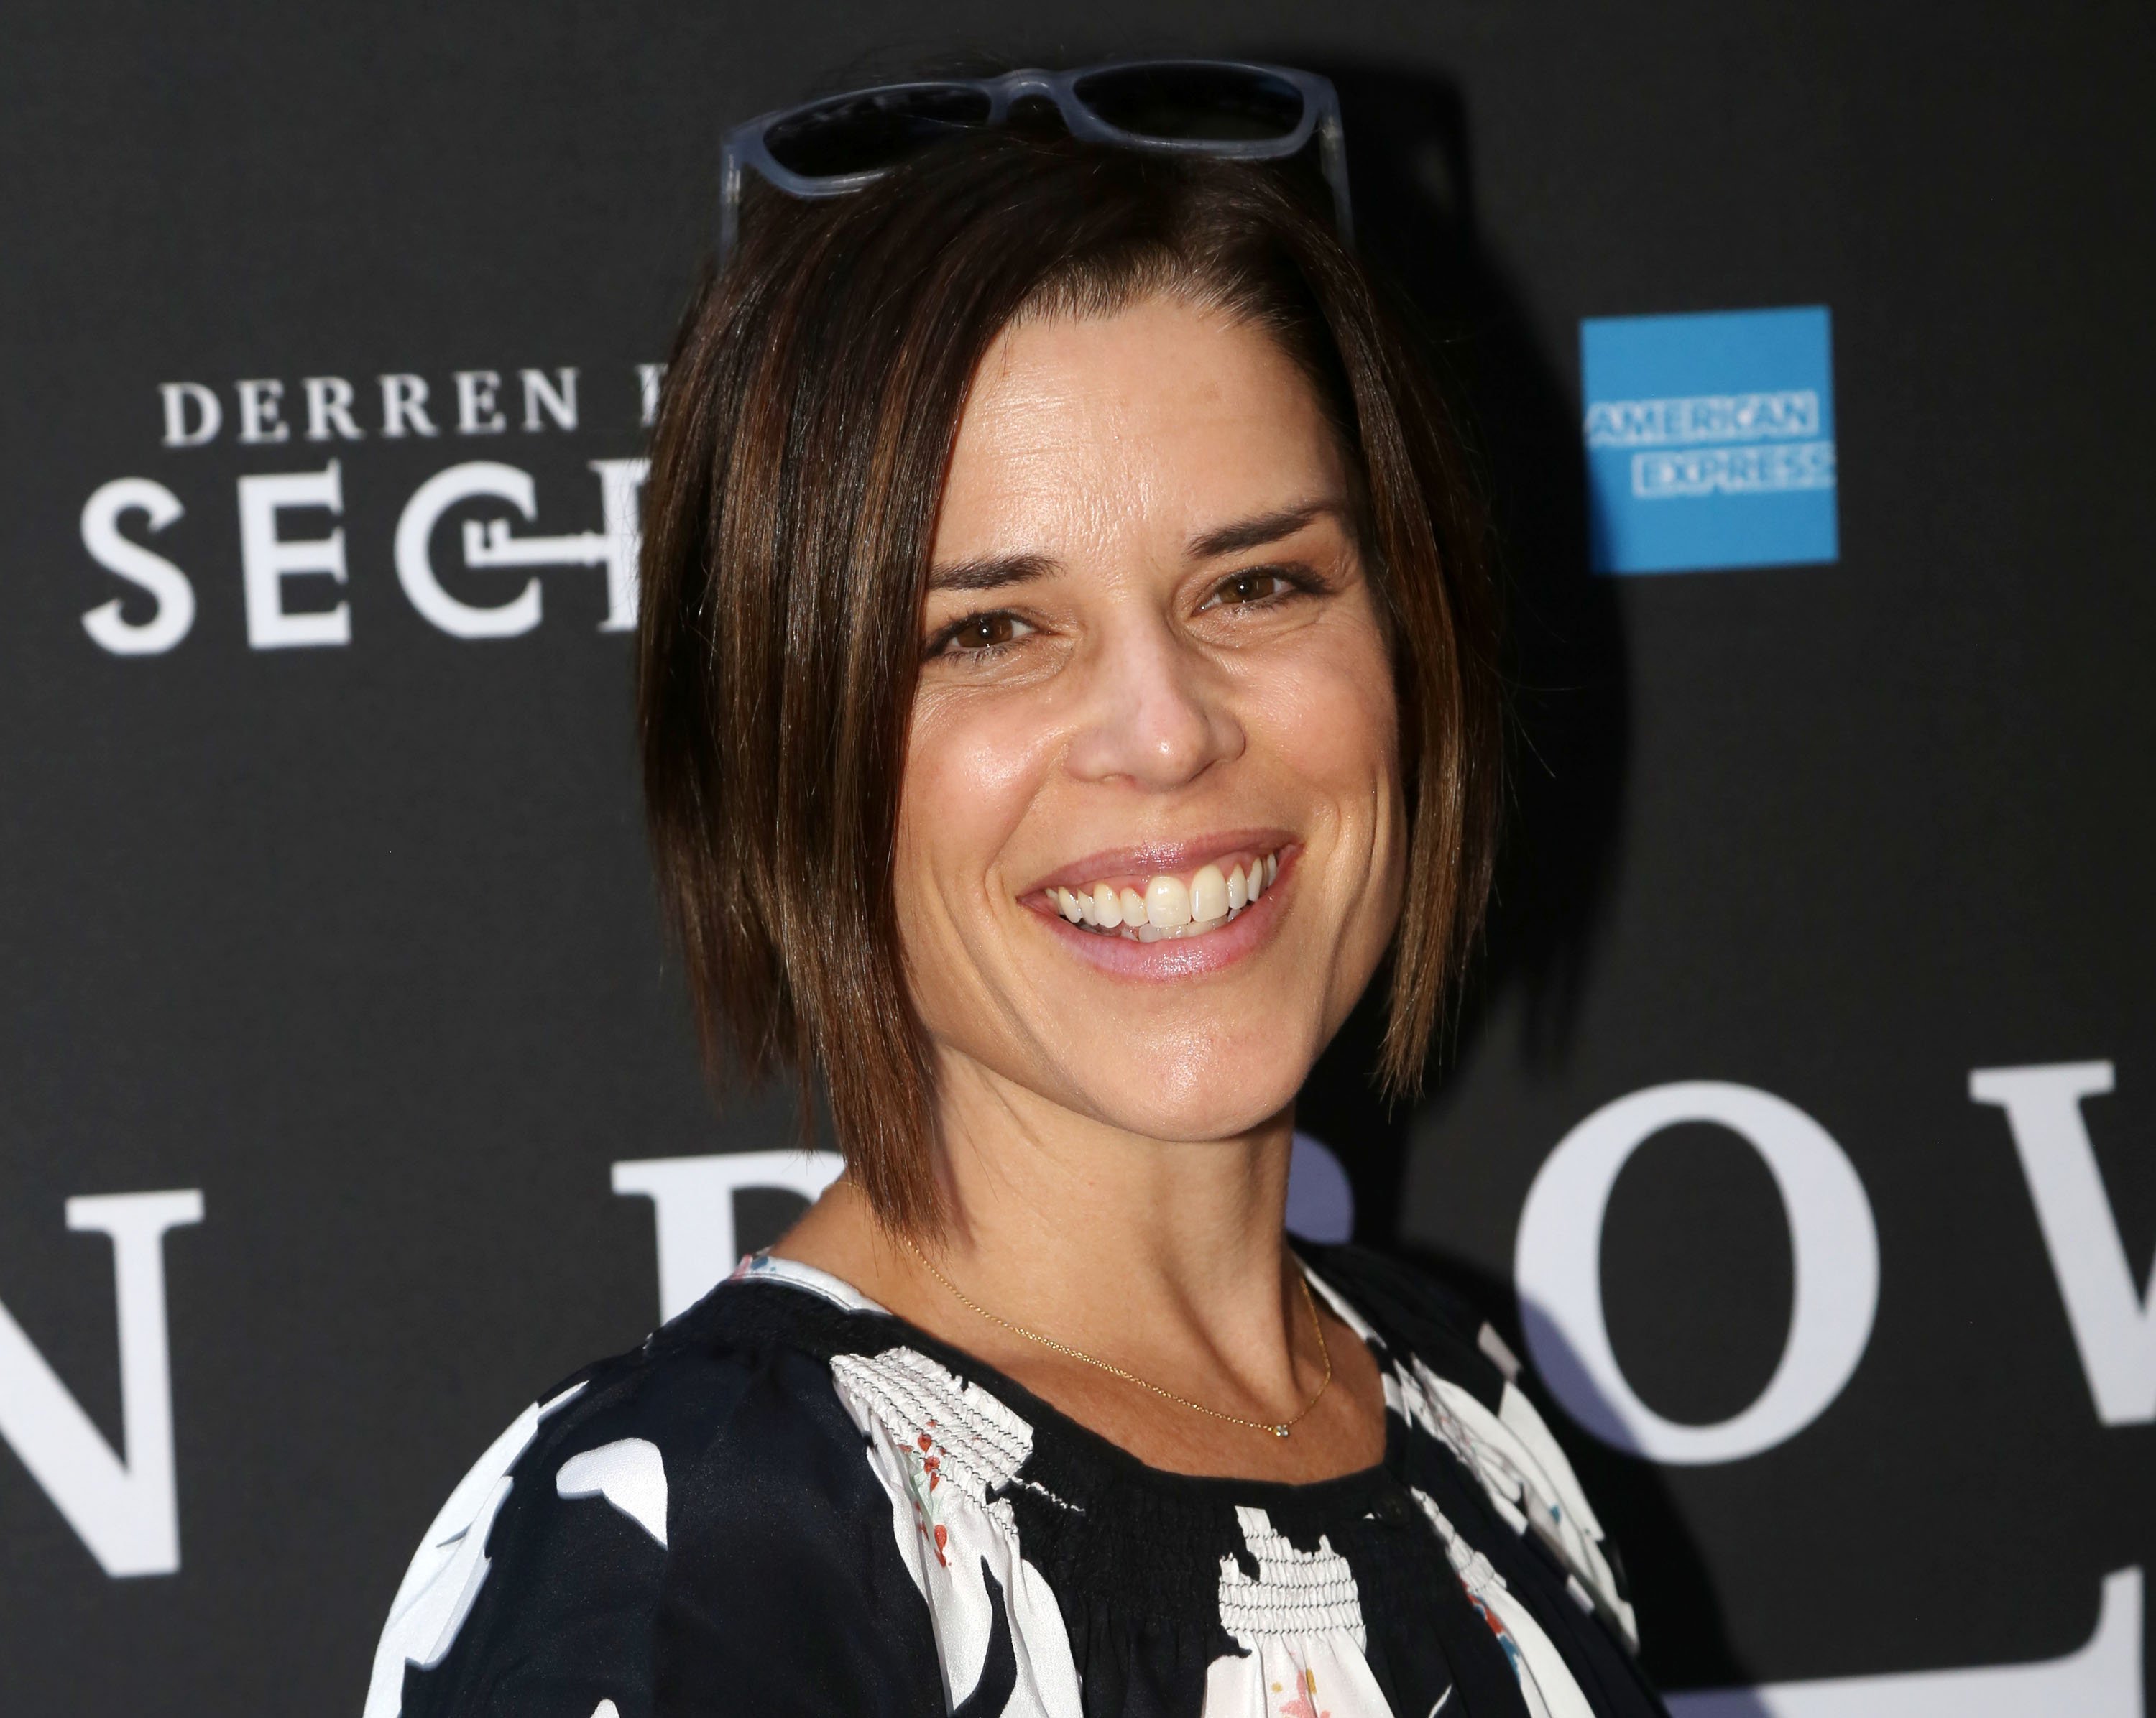 Neve Campbell poses at the opening night of 'Derren Brown: Secret' on Broadway on September 15, 2019 in New York City. 